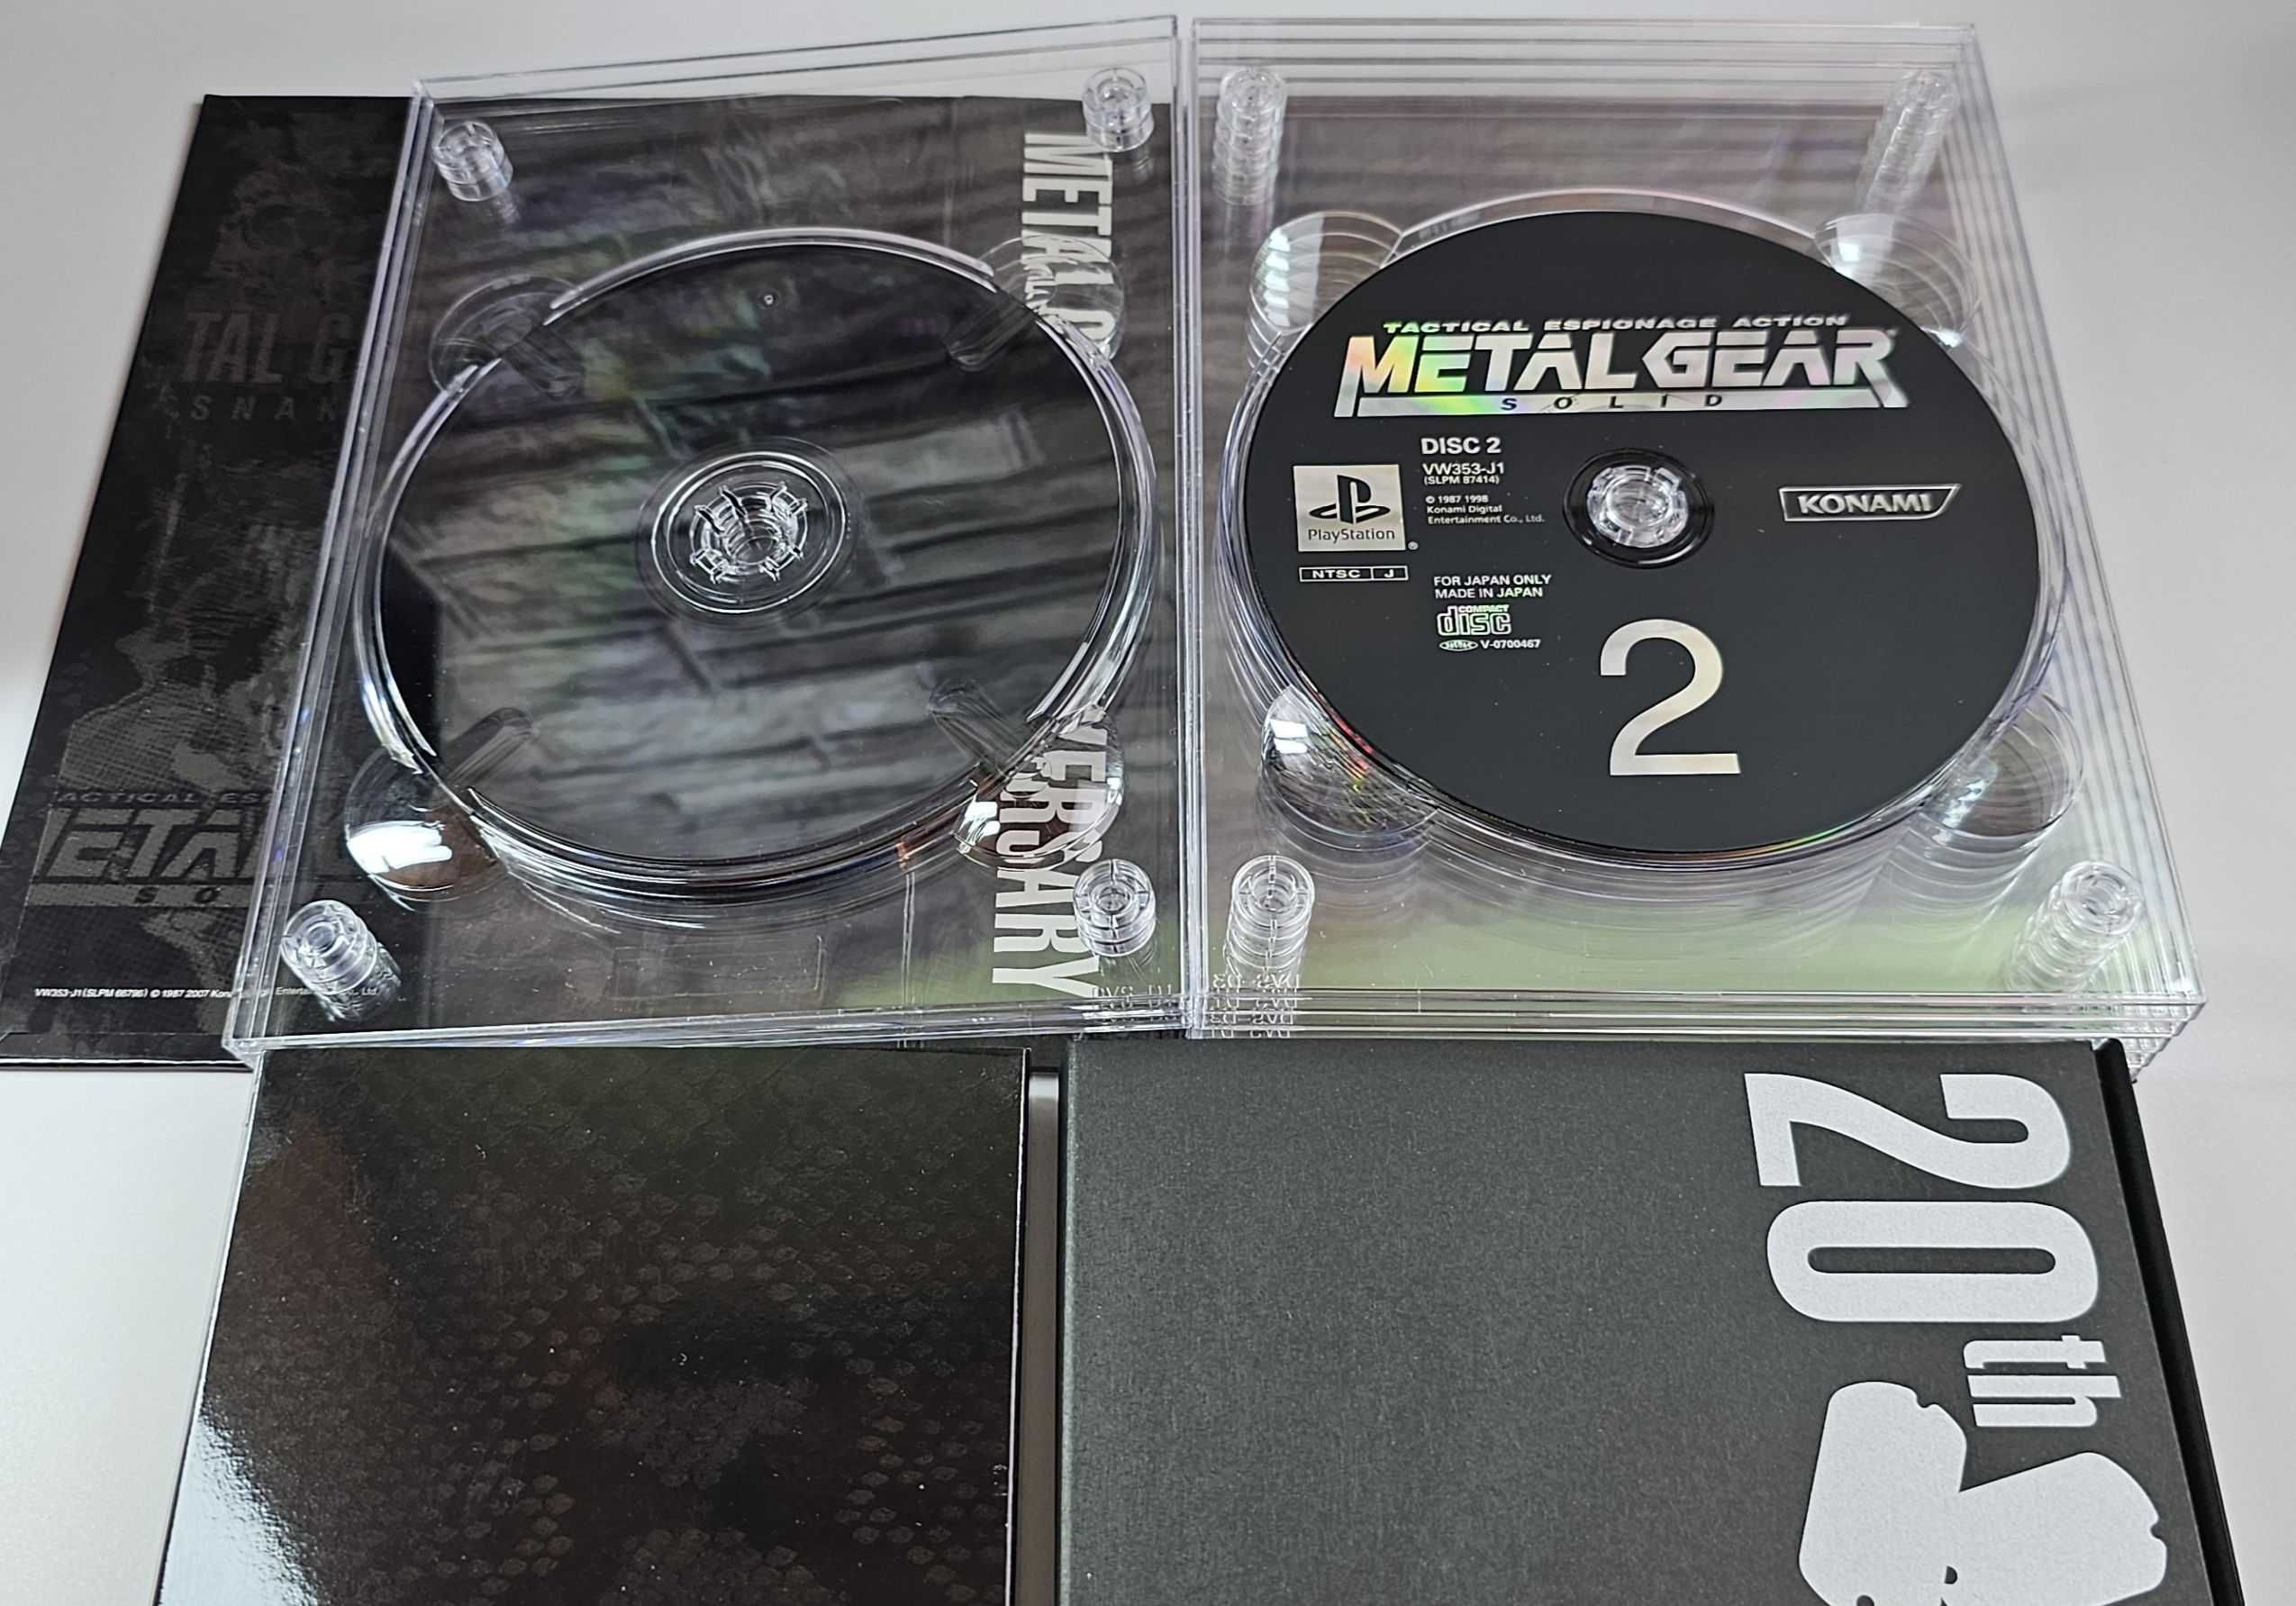 20th Anniversary Metal Gear Solid Collection NOWA PSP